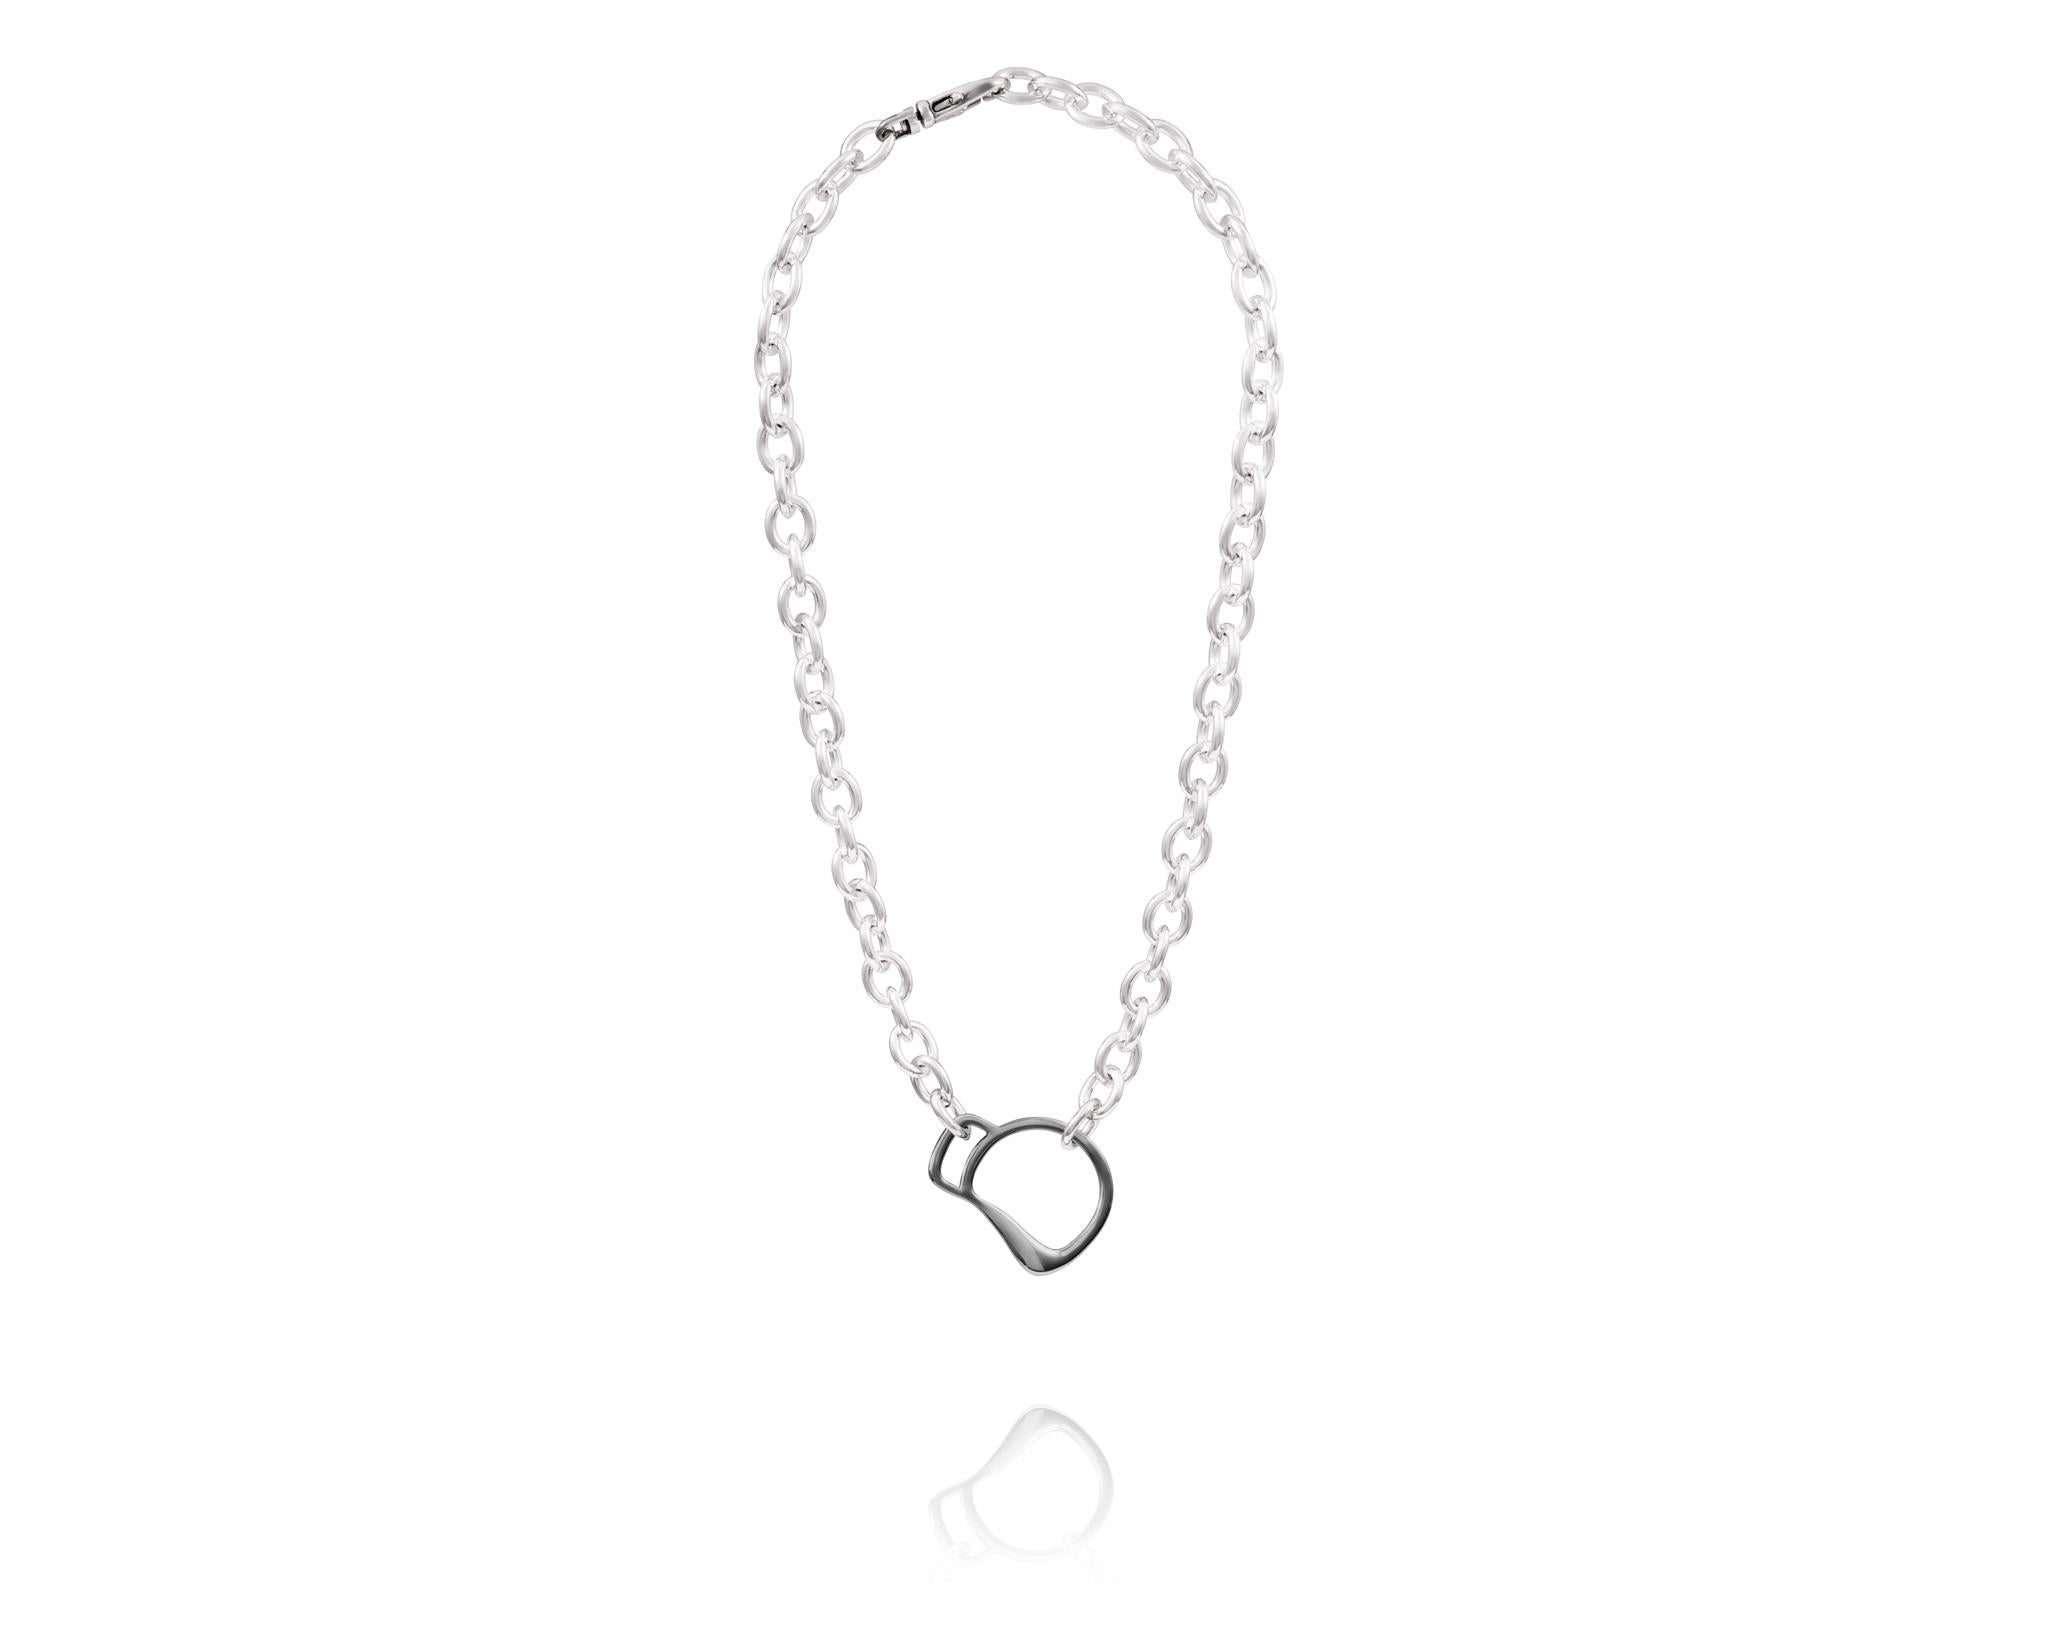 Vincent Peach Equestrian Sterling Silver Cheval Bit Chain Link Necklace For Sale 7